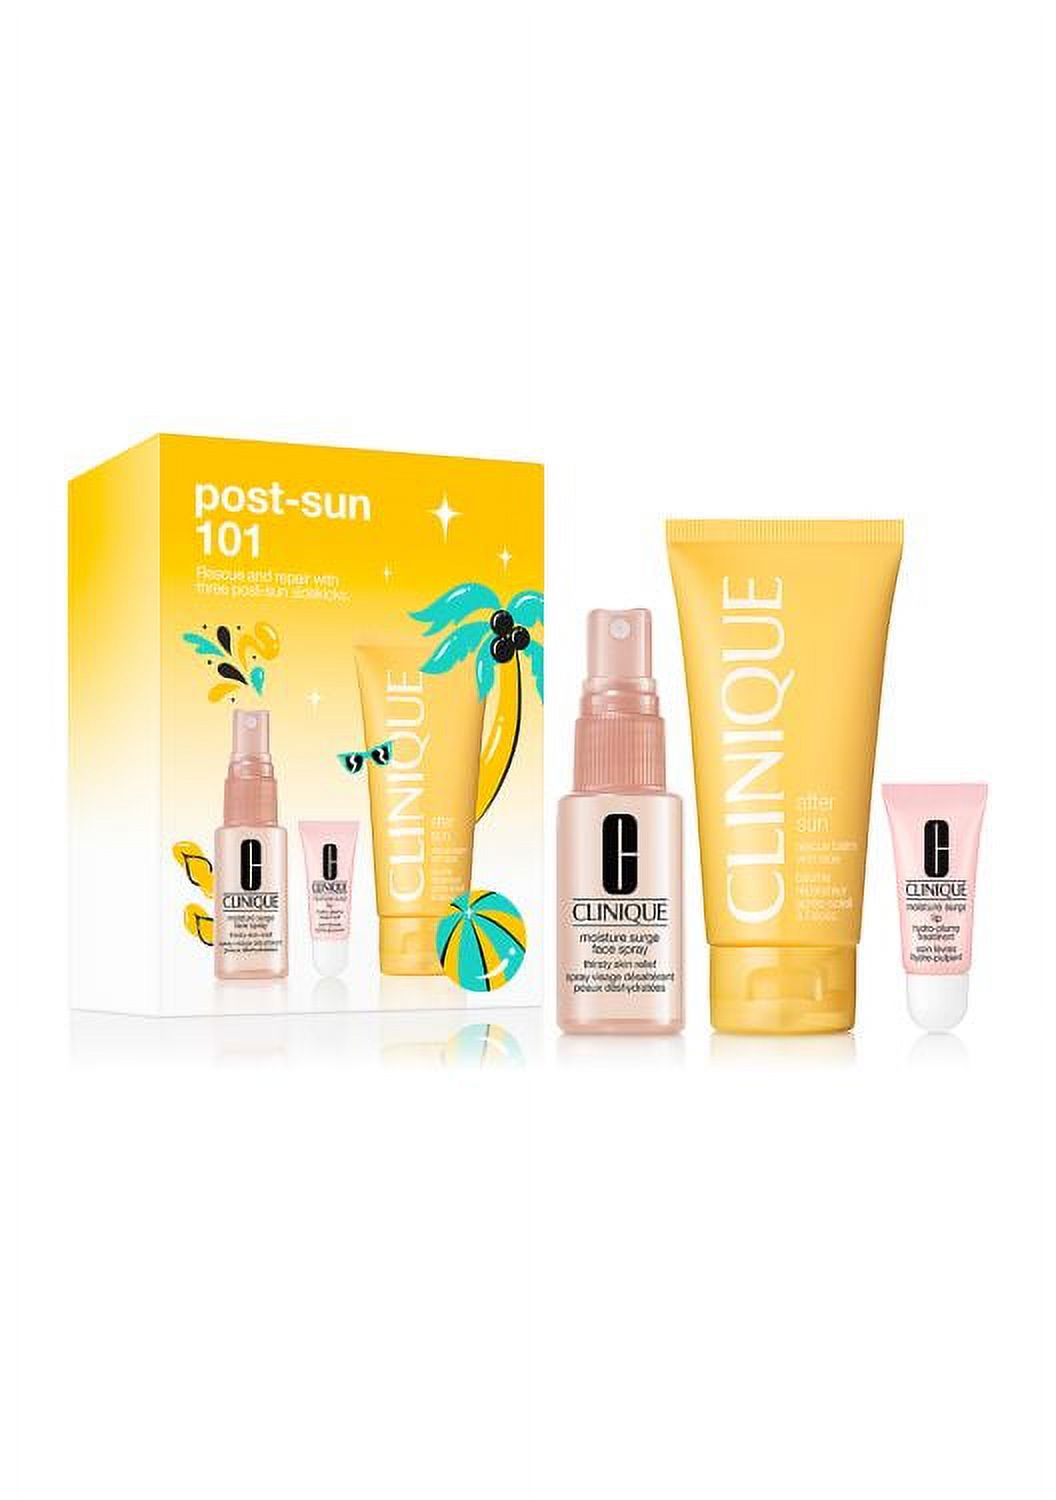 Clinique Post-Sun 101 3 Pcs Set  / New With Box - image 1 of 2